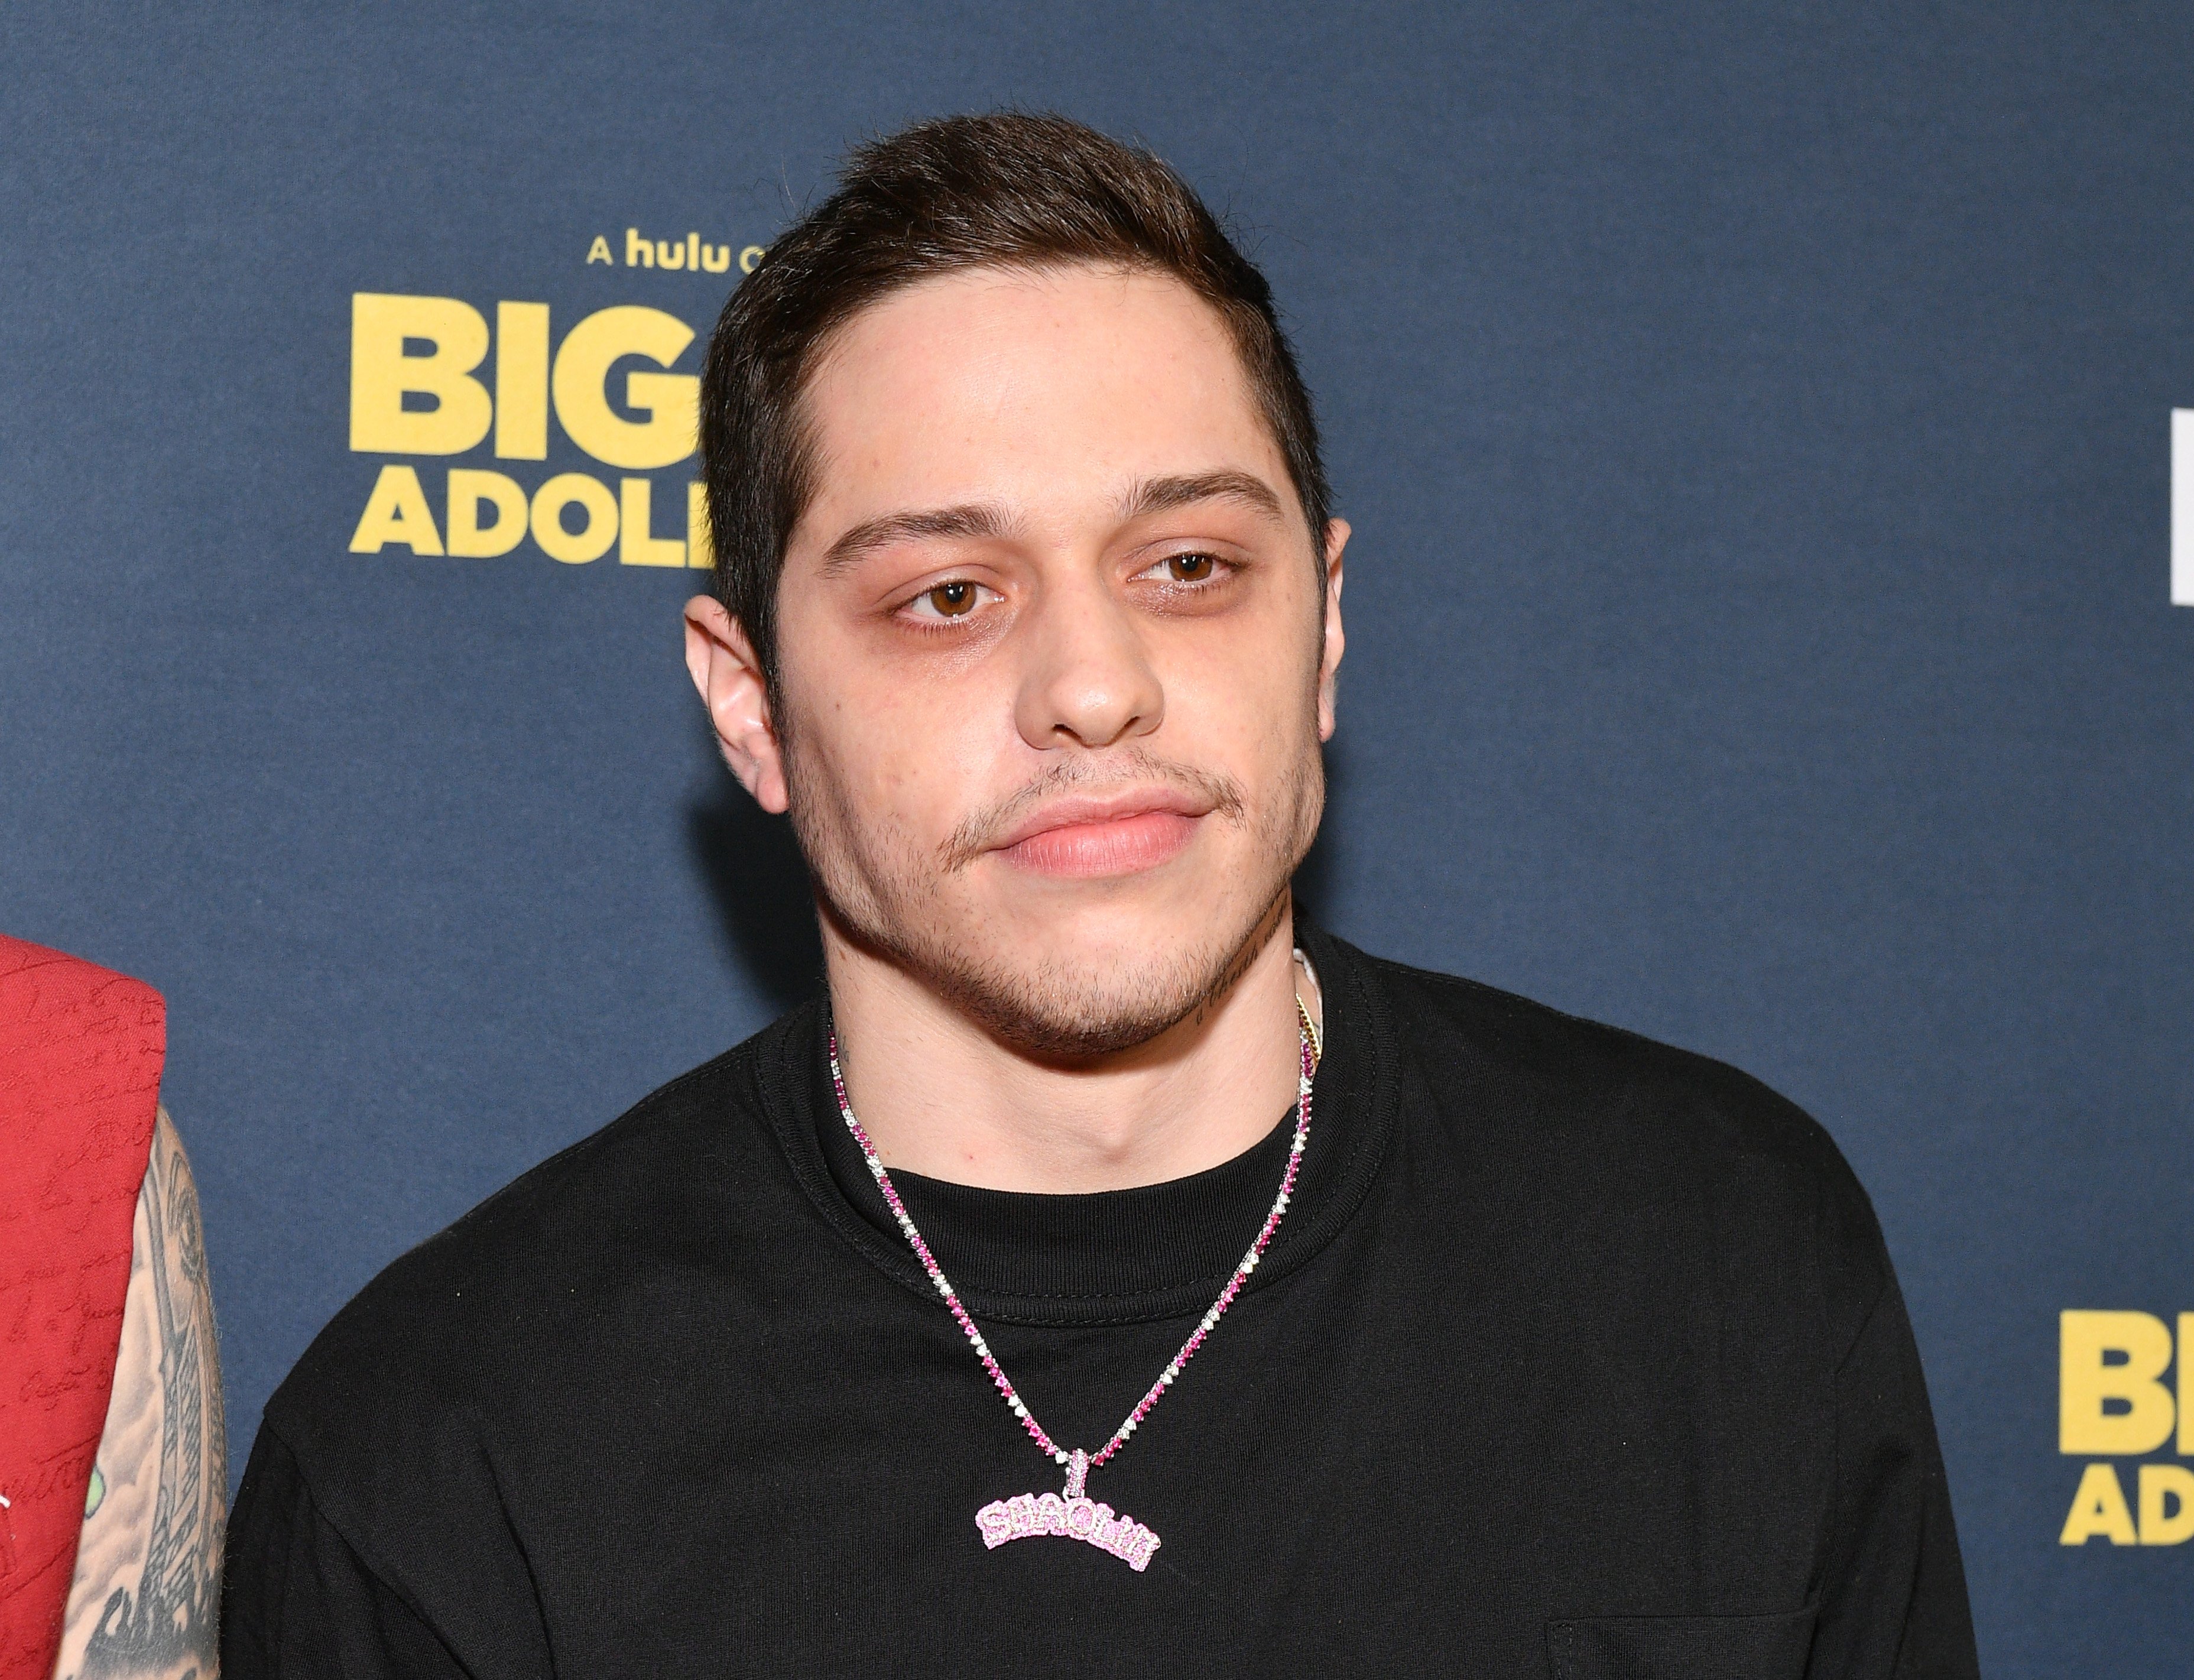 Pete Davidson at the premiere of 'Big Time Adolescence' in 2020